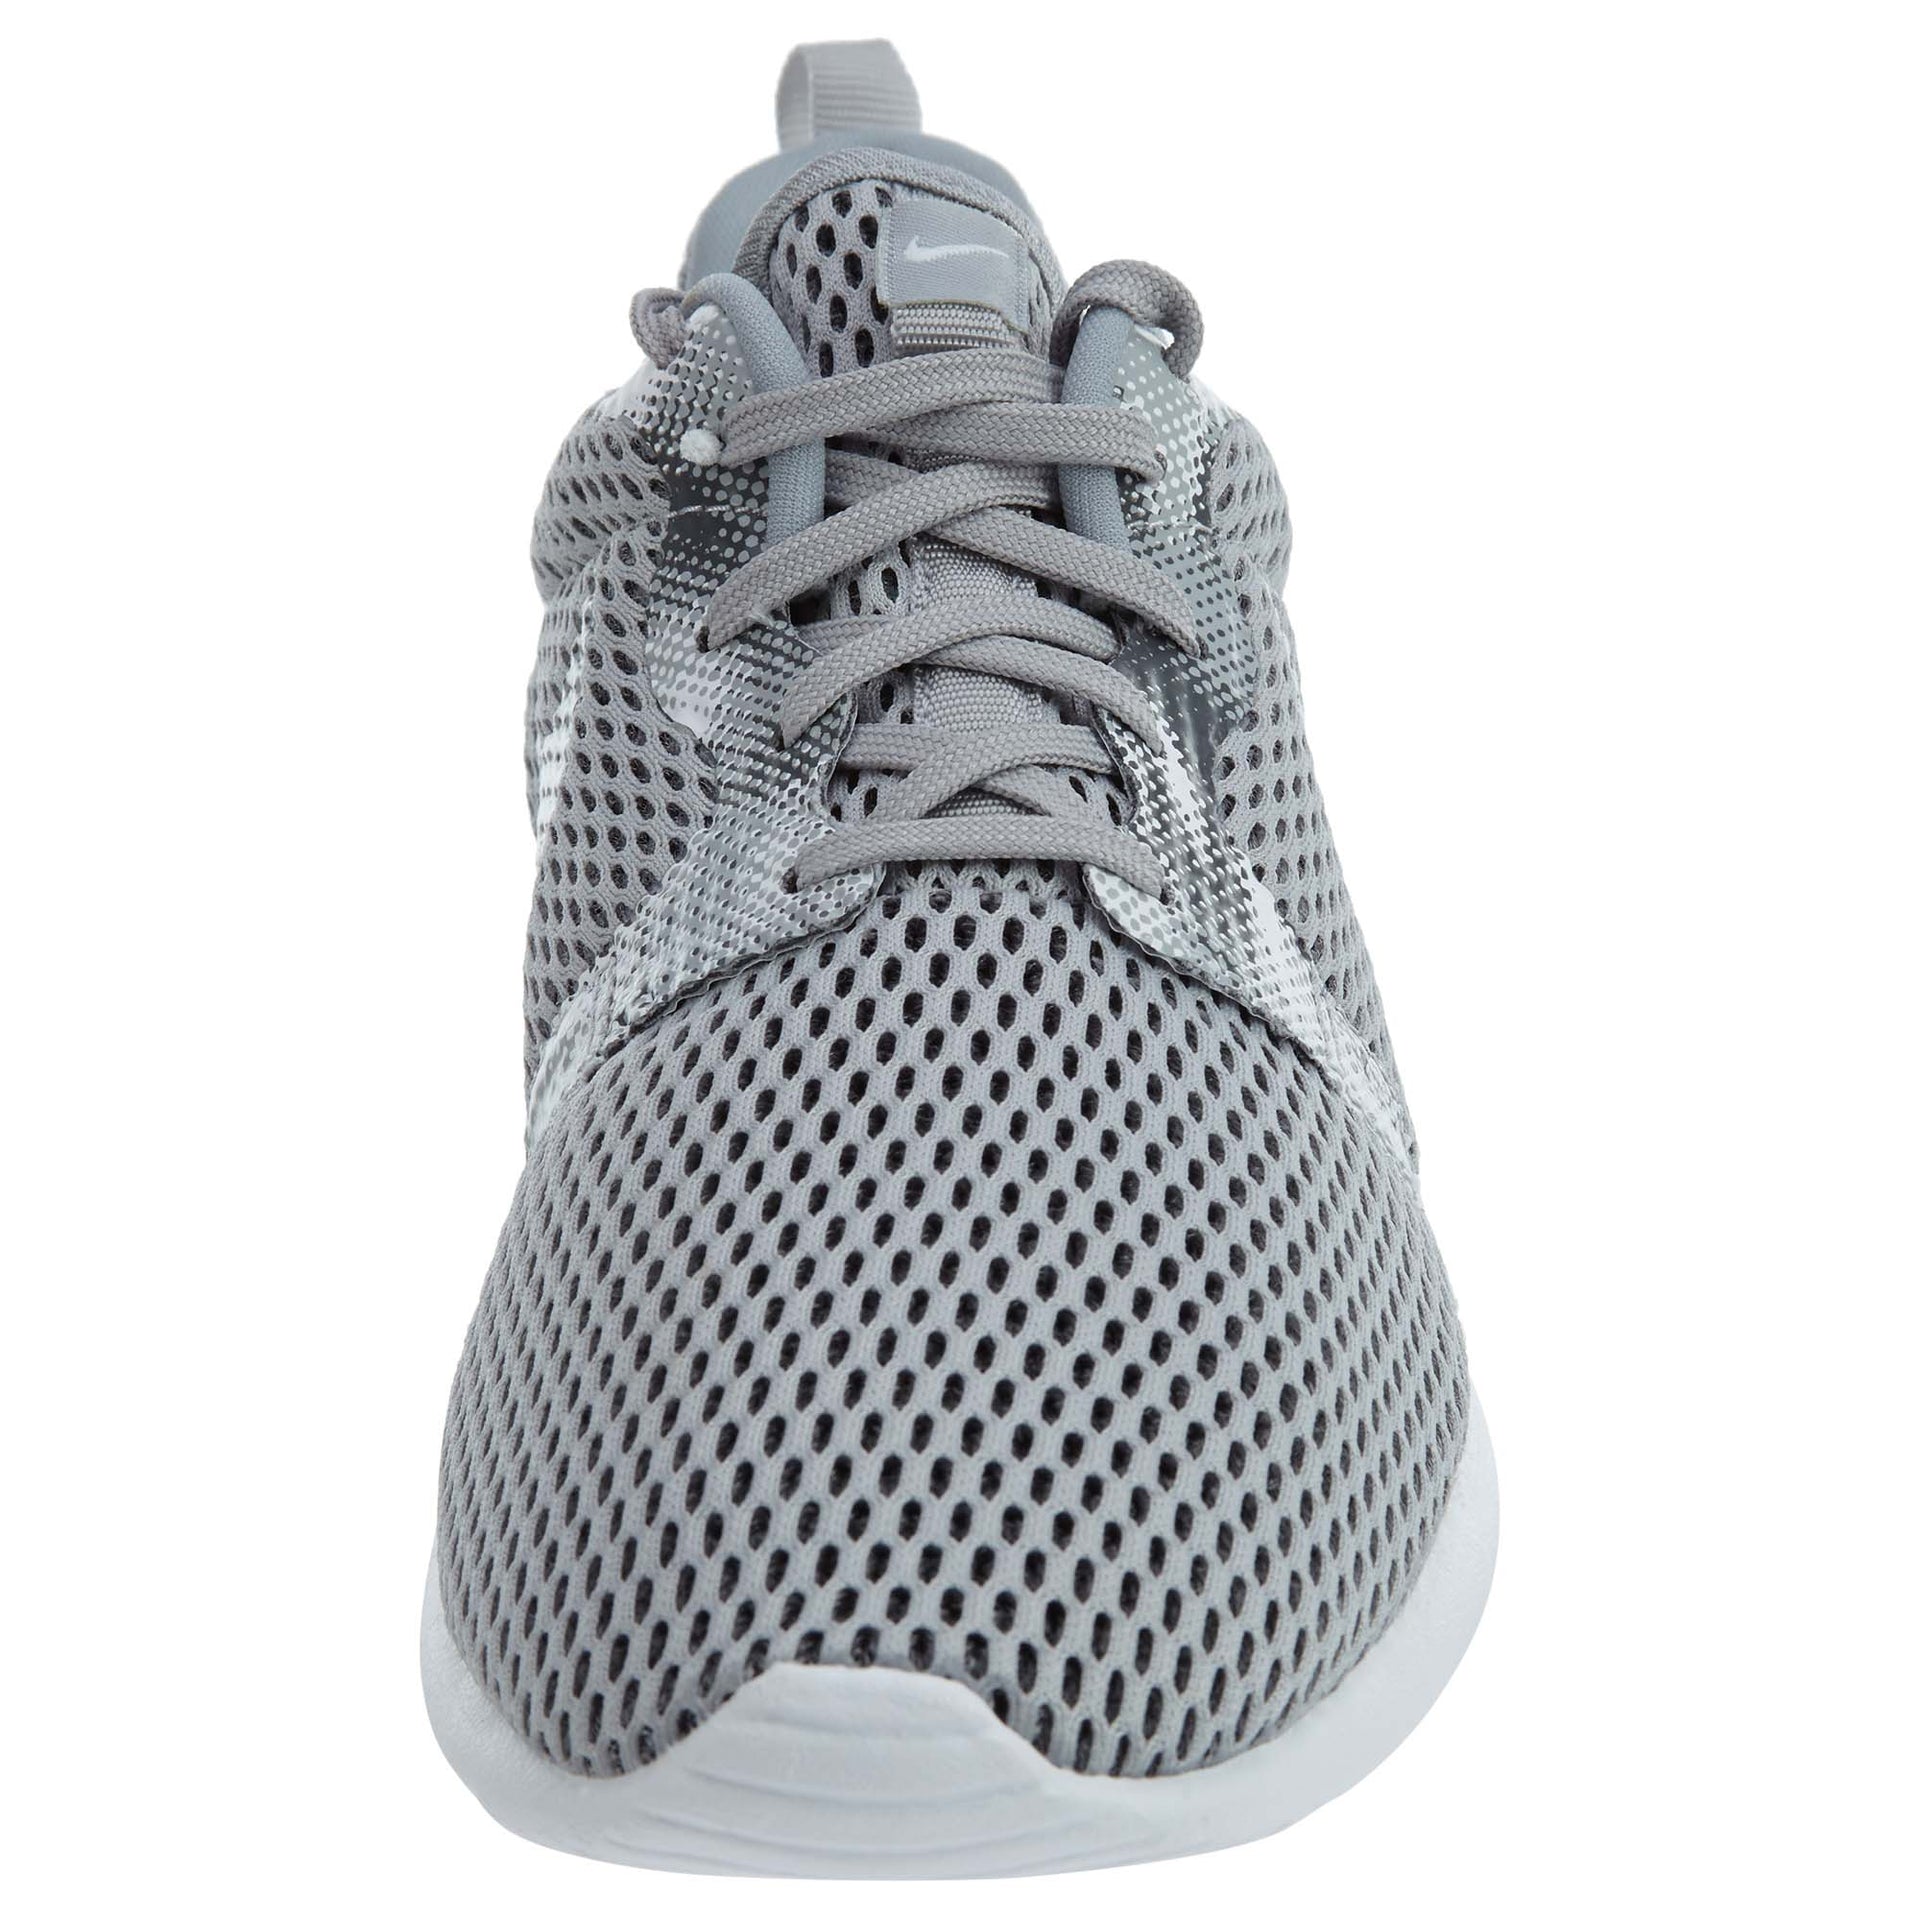 Nike Roshe One Hyperfuse BR GPX Grey Mens Style :859526